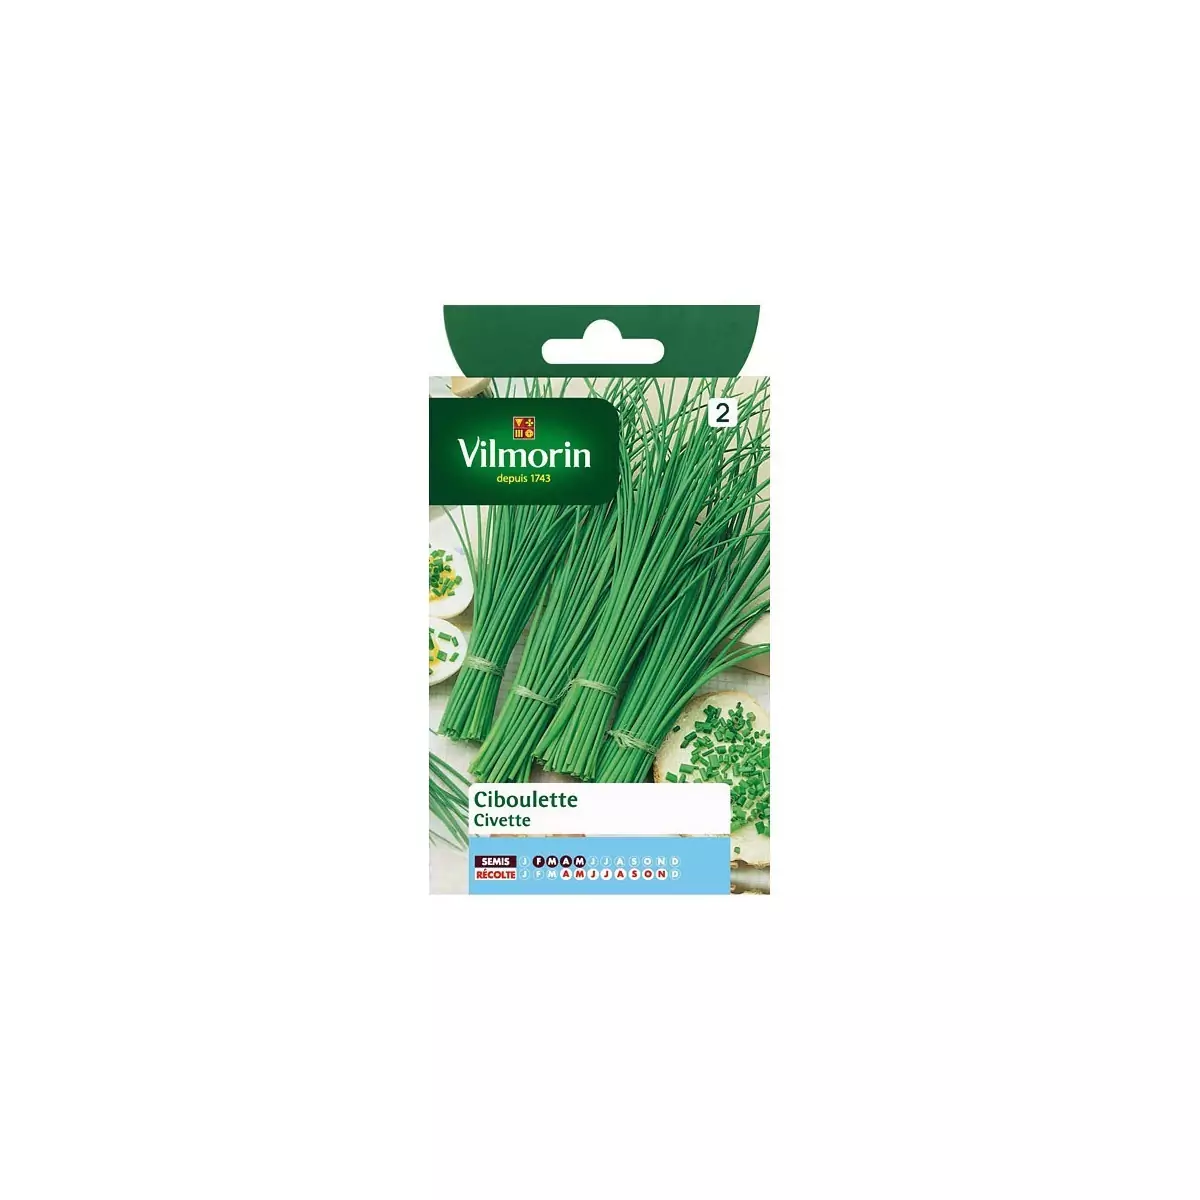 Product sheet Very fine Danish chives